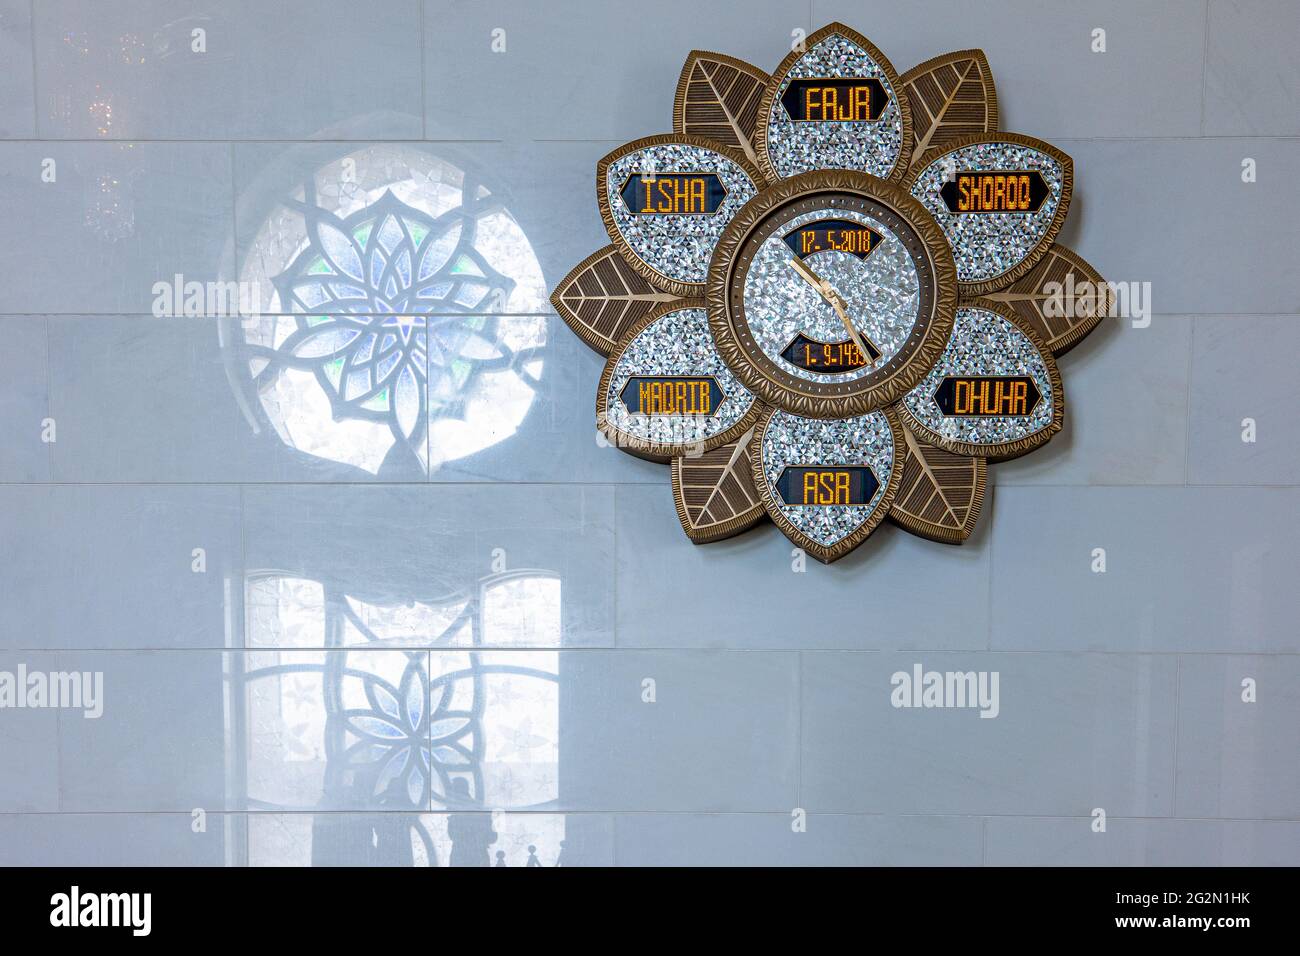 Abu Dhabi, United Arab Emirates - May 17, 2018: A wall with reflections and decorated clock in the entrance of the  Sheick Zayed Grand Mosque Stock Photo